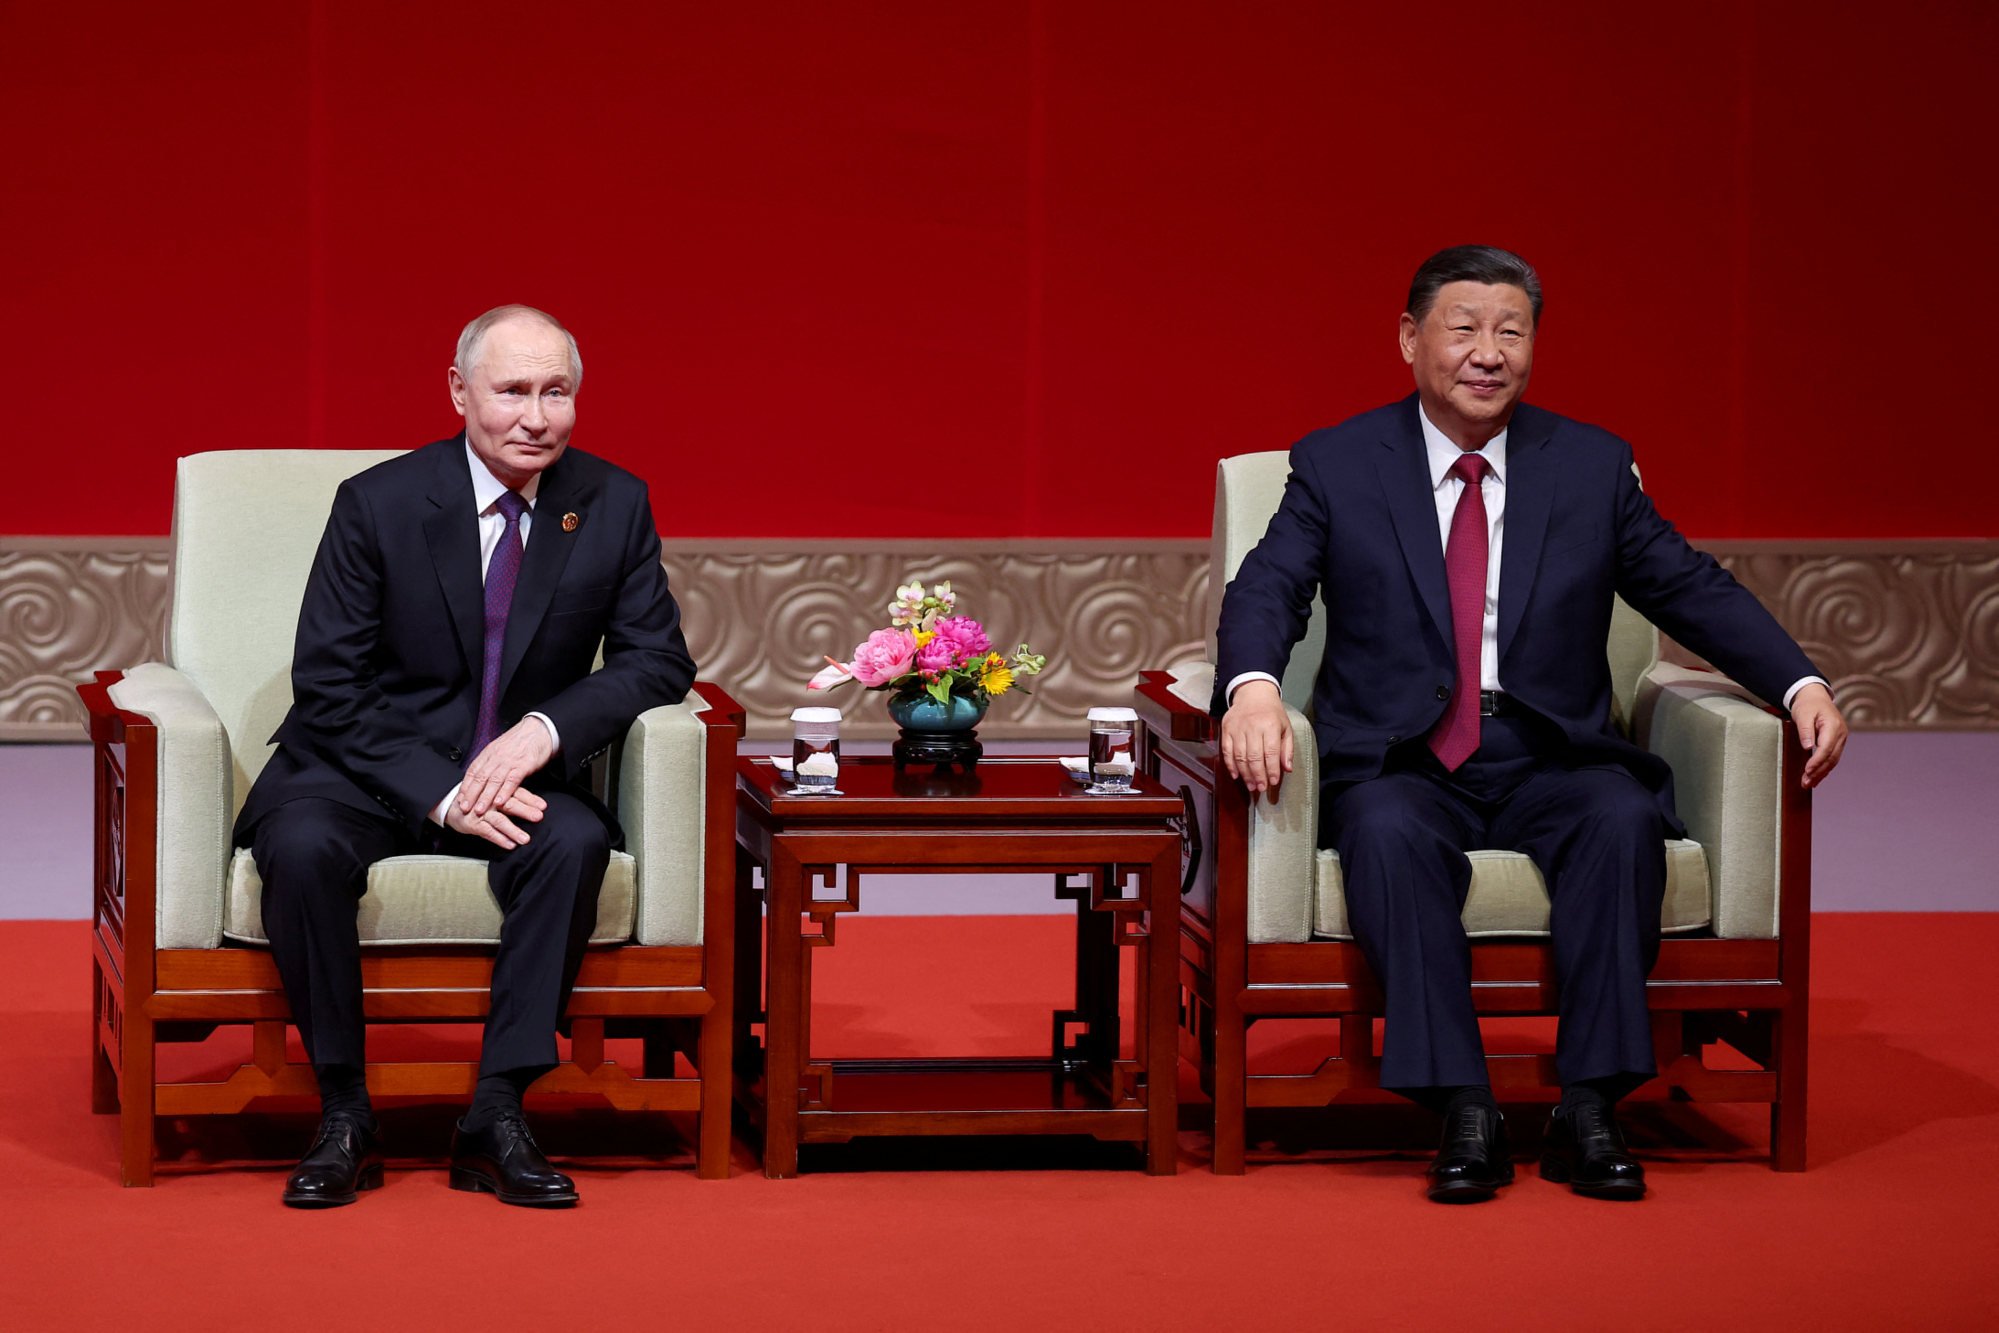 Putin and Xi at the gala event in Beijing celebrating the 75th anniversary of China-Russia relations on Thursday. Photo: Sputnik via Reuters